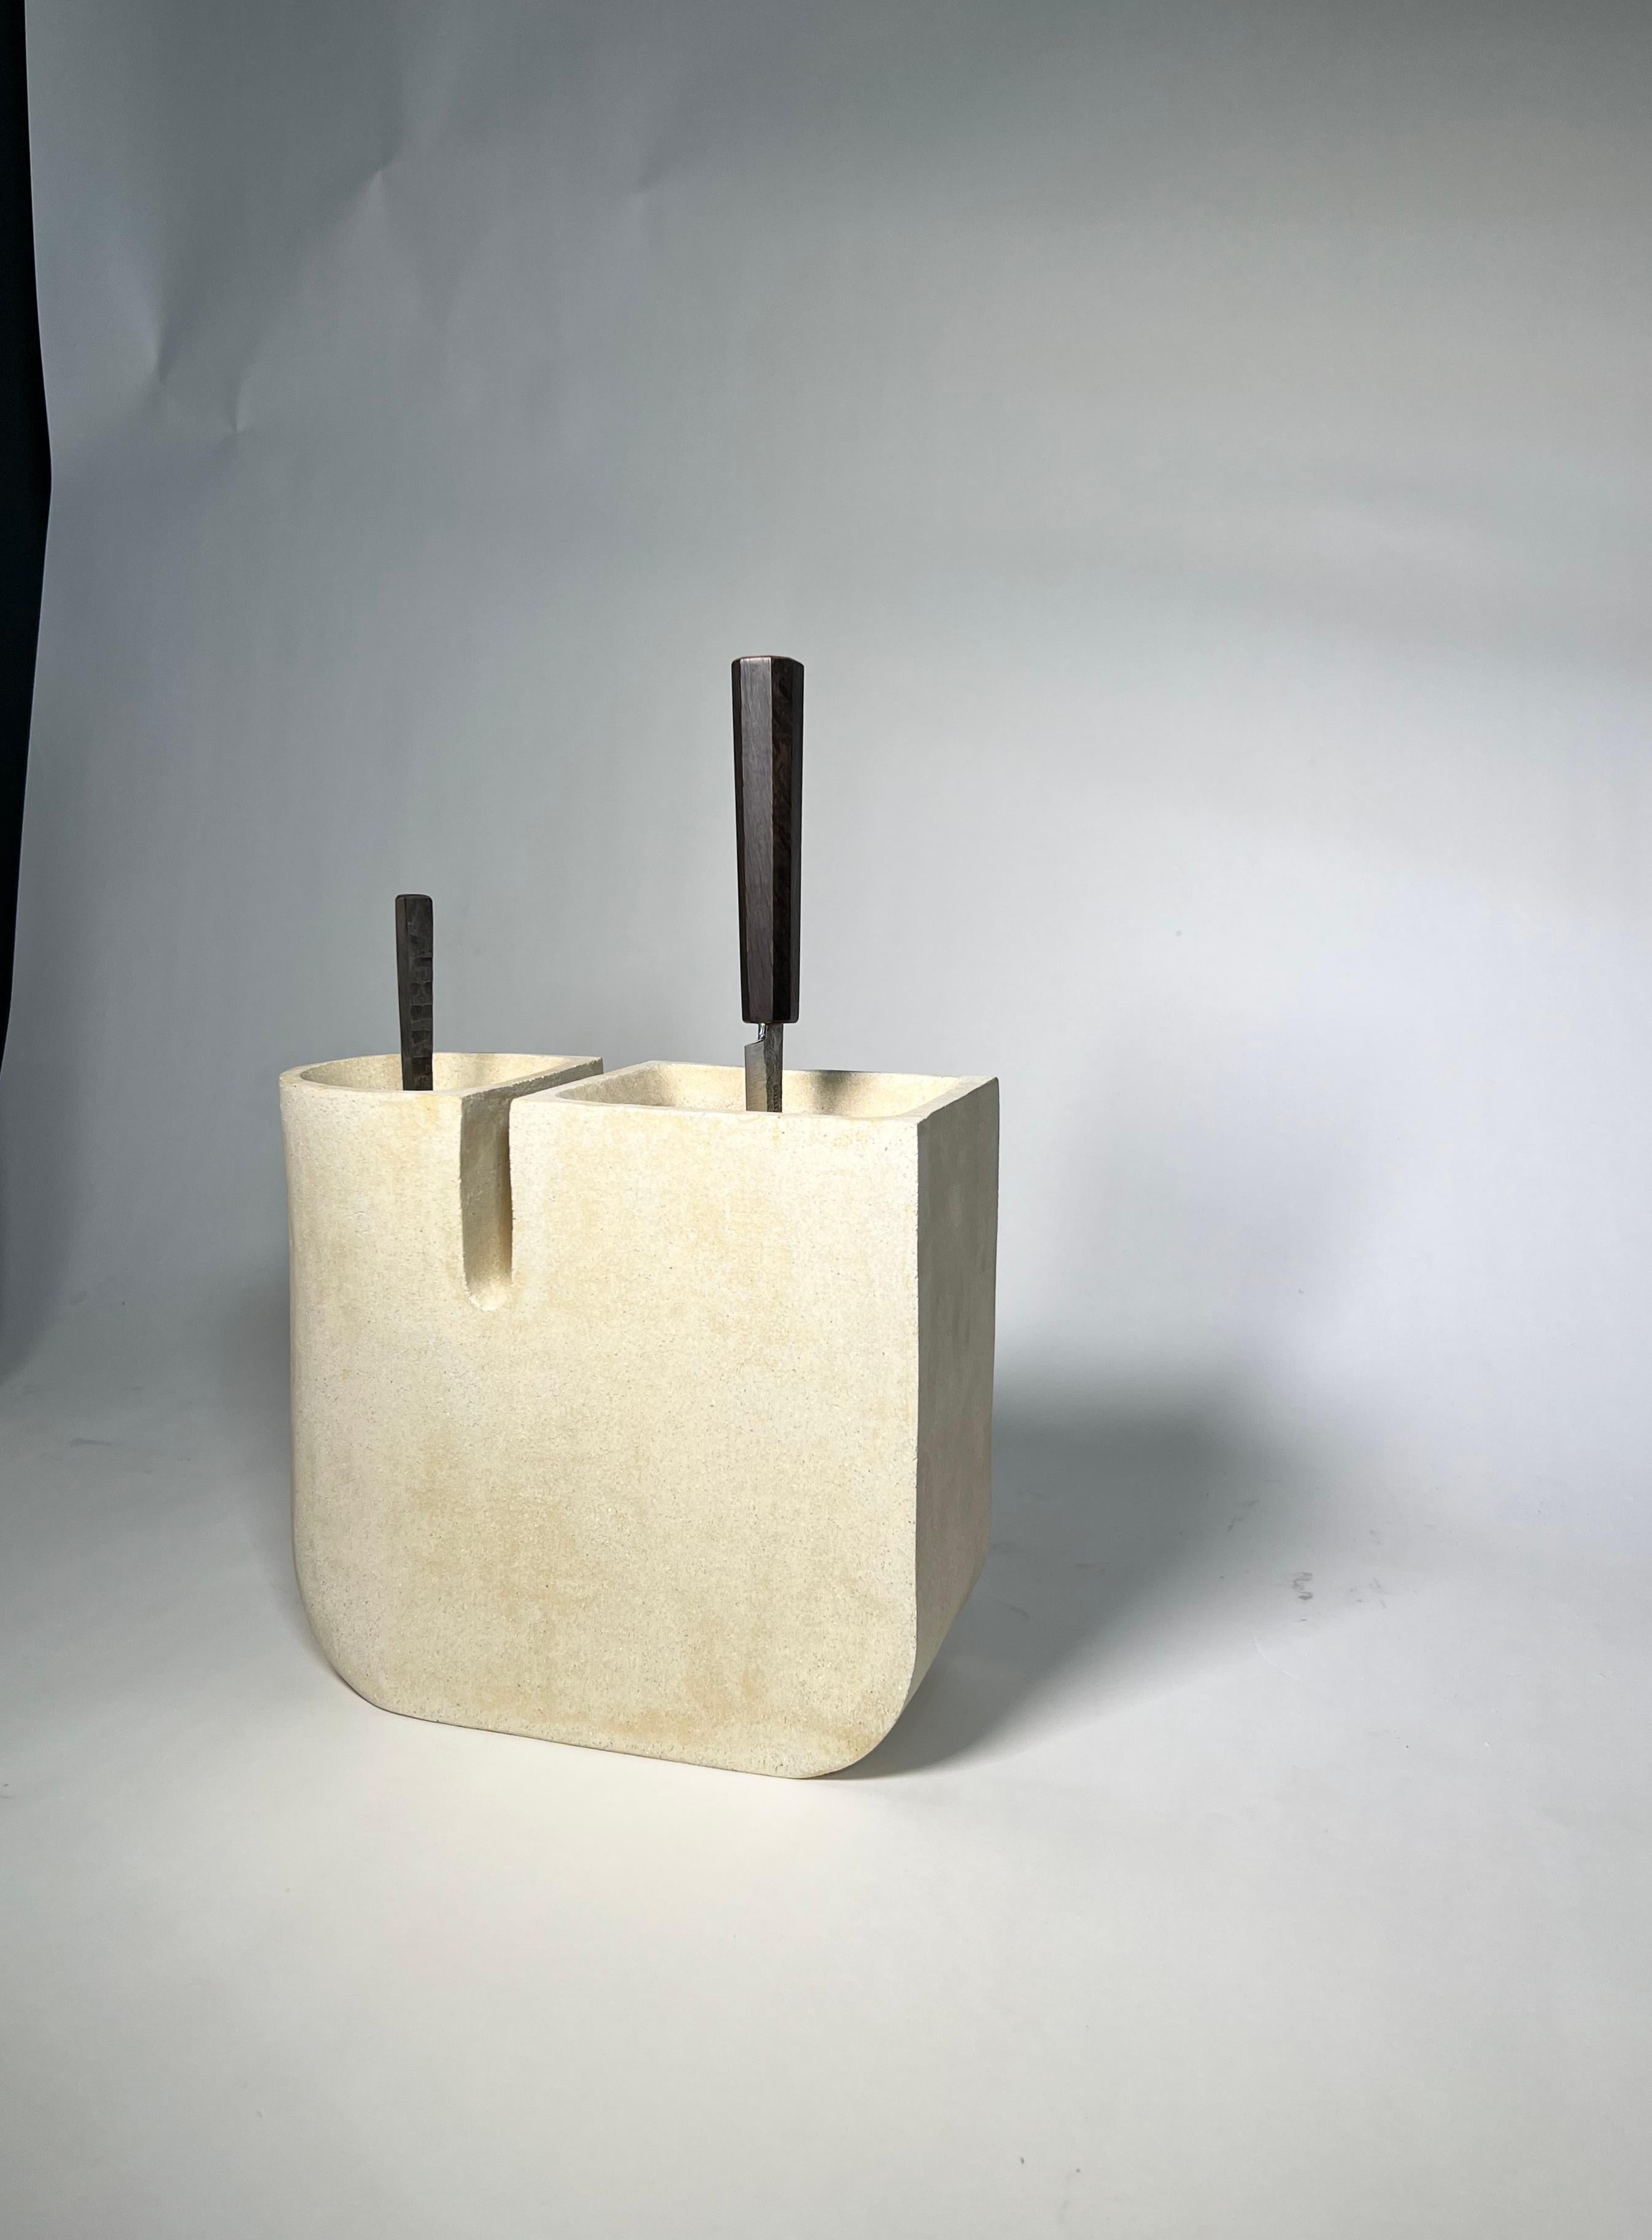 Modern Media Knife Block in Ceramic with Glaze Options Available by Piscina For Sale